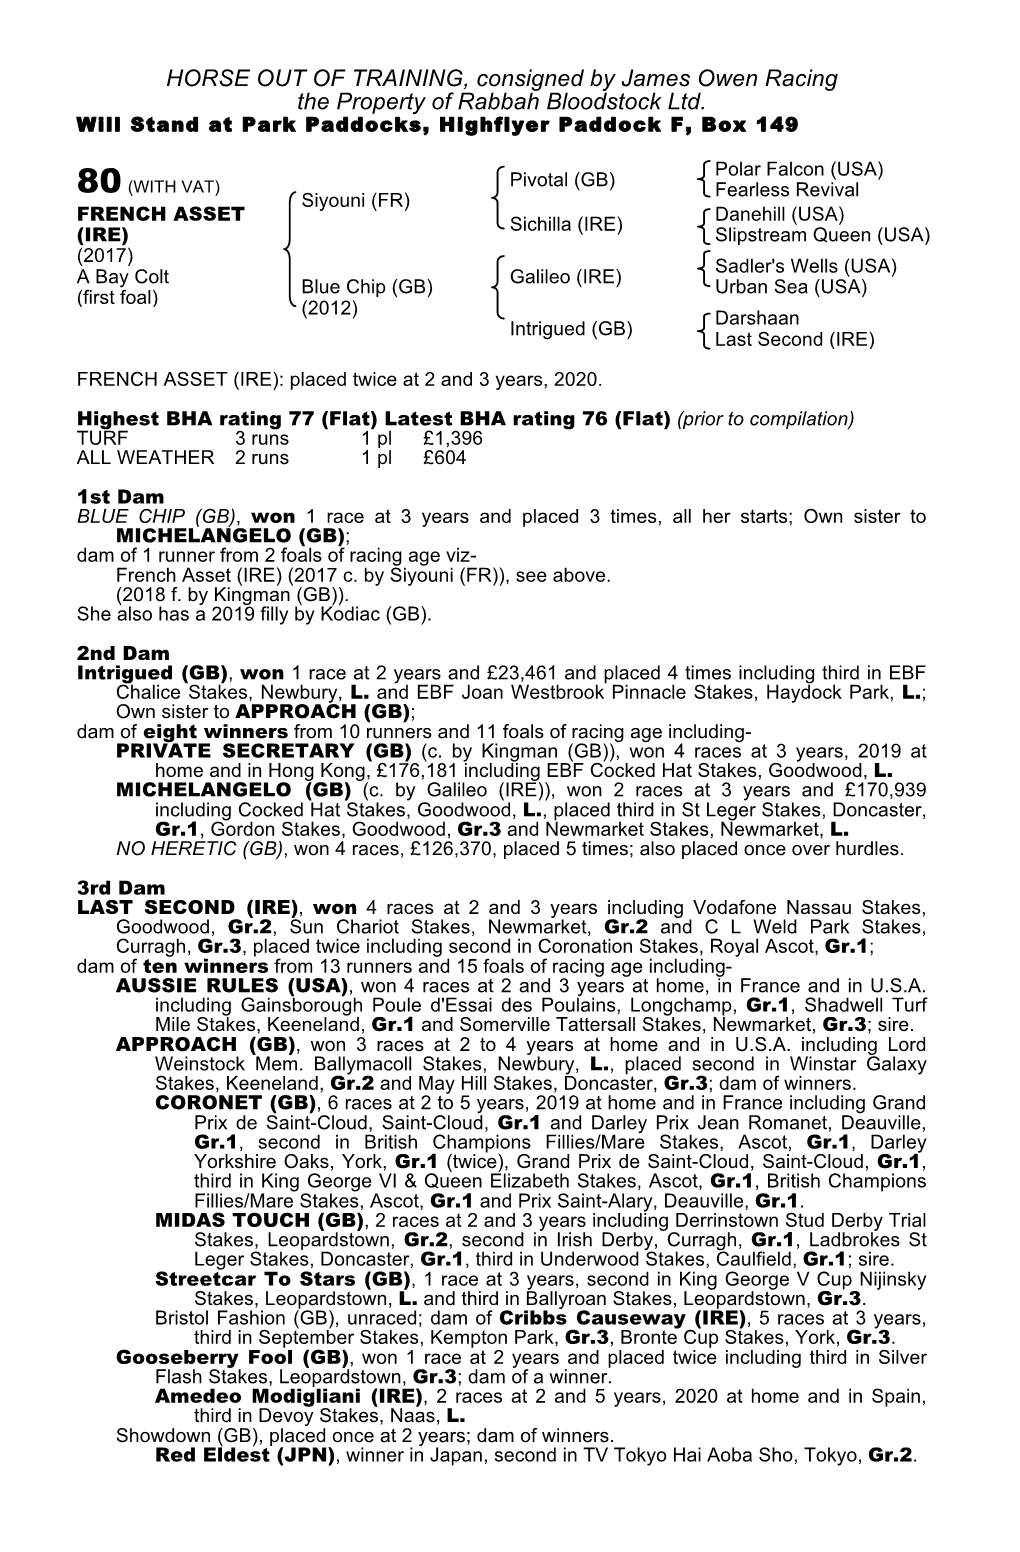 HORSE out of TRAINING, Consigned by James Owen Racing the Property of Rabbah Bloodstock Ltd